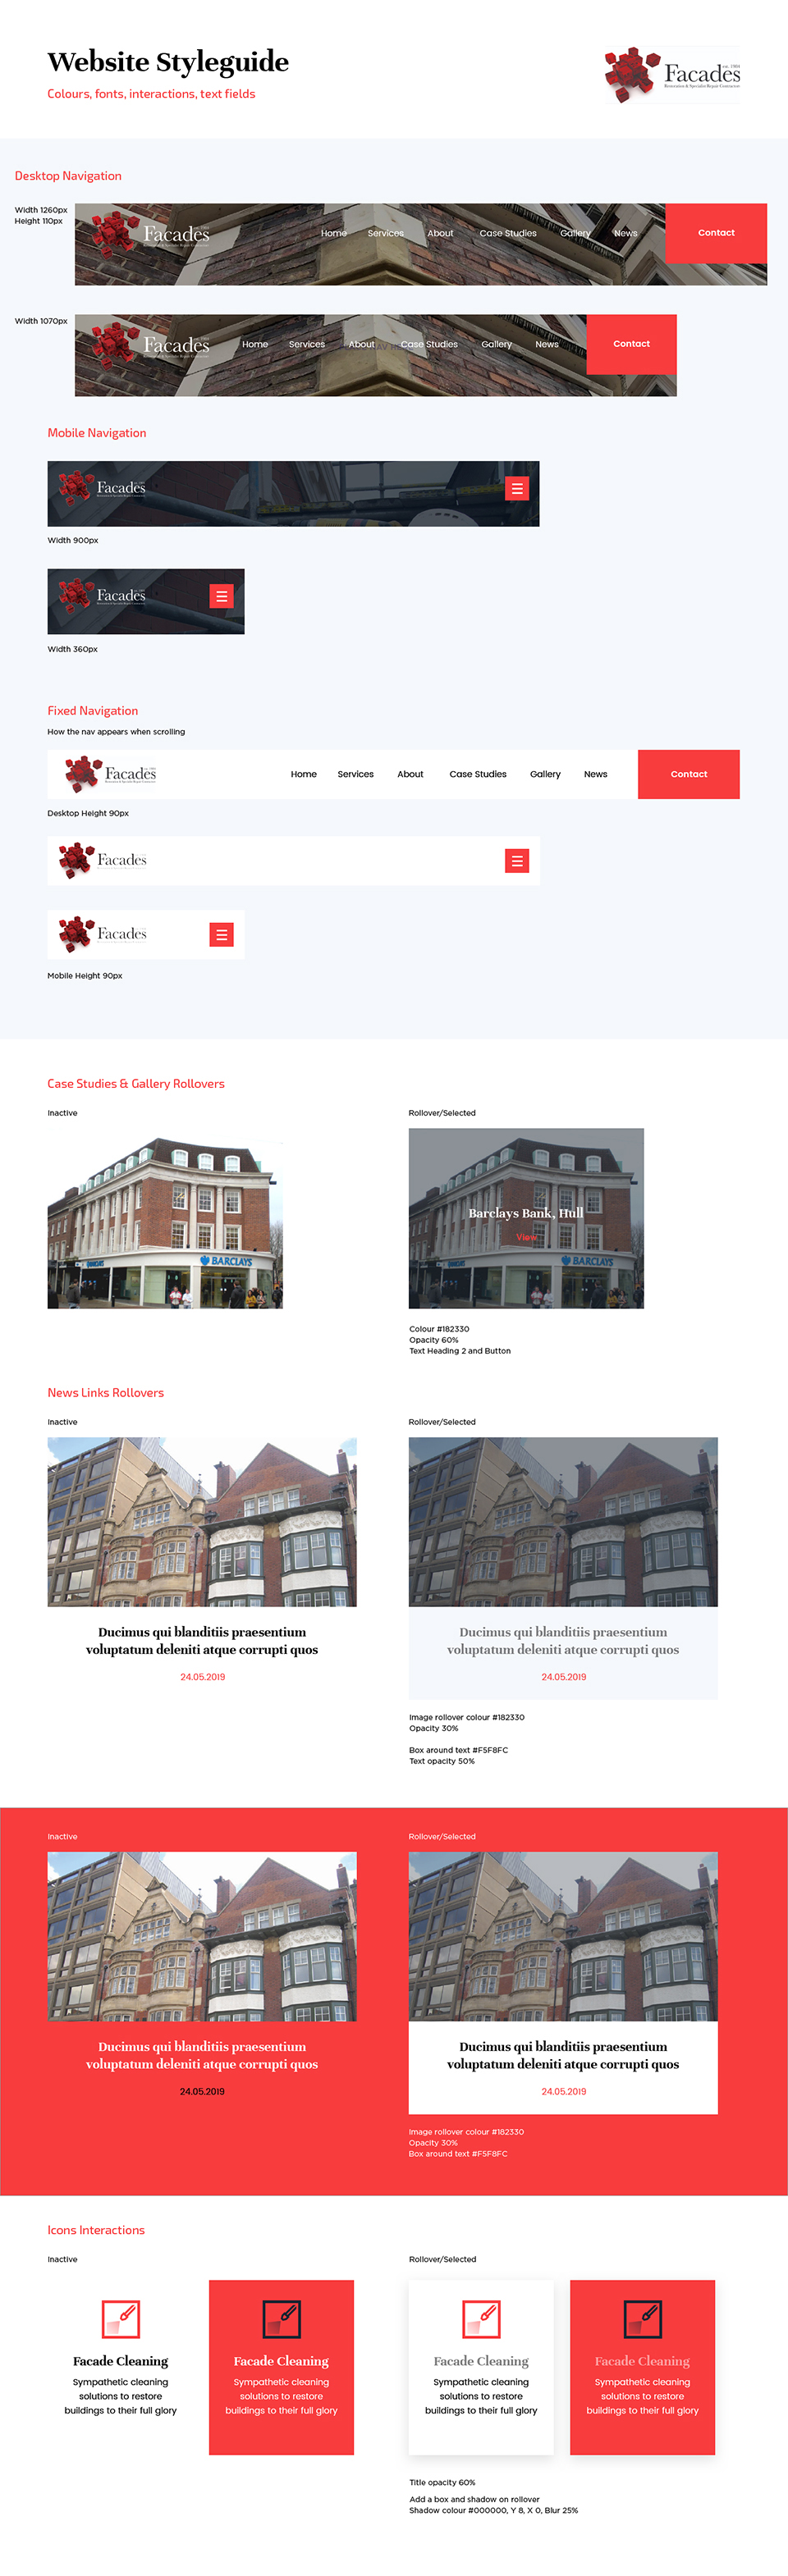 Developing the Facades website identity image